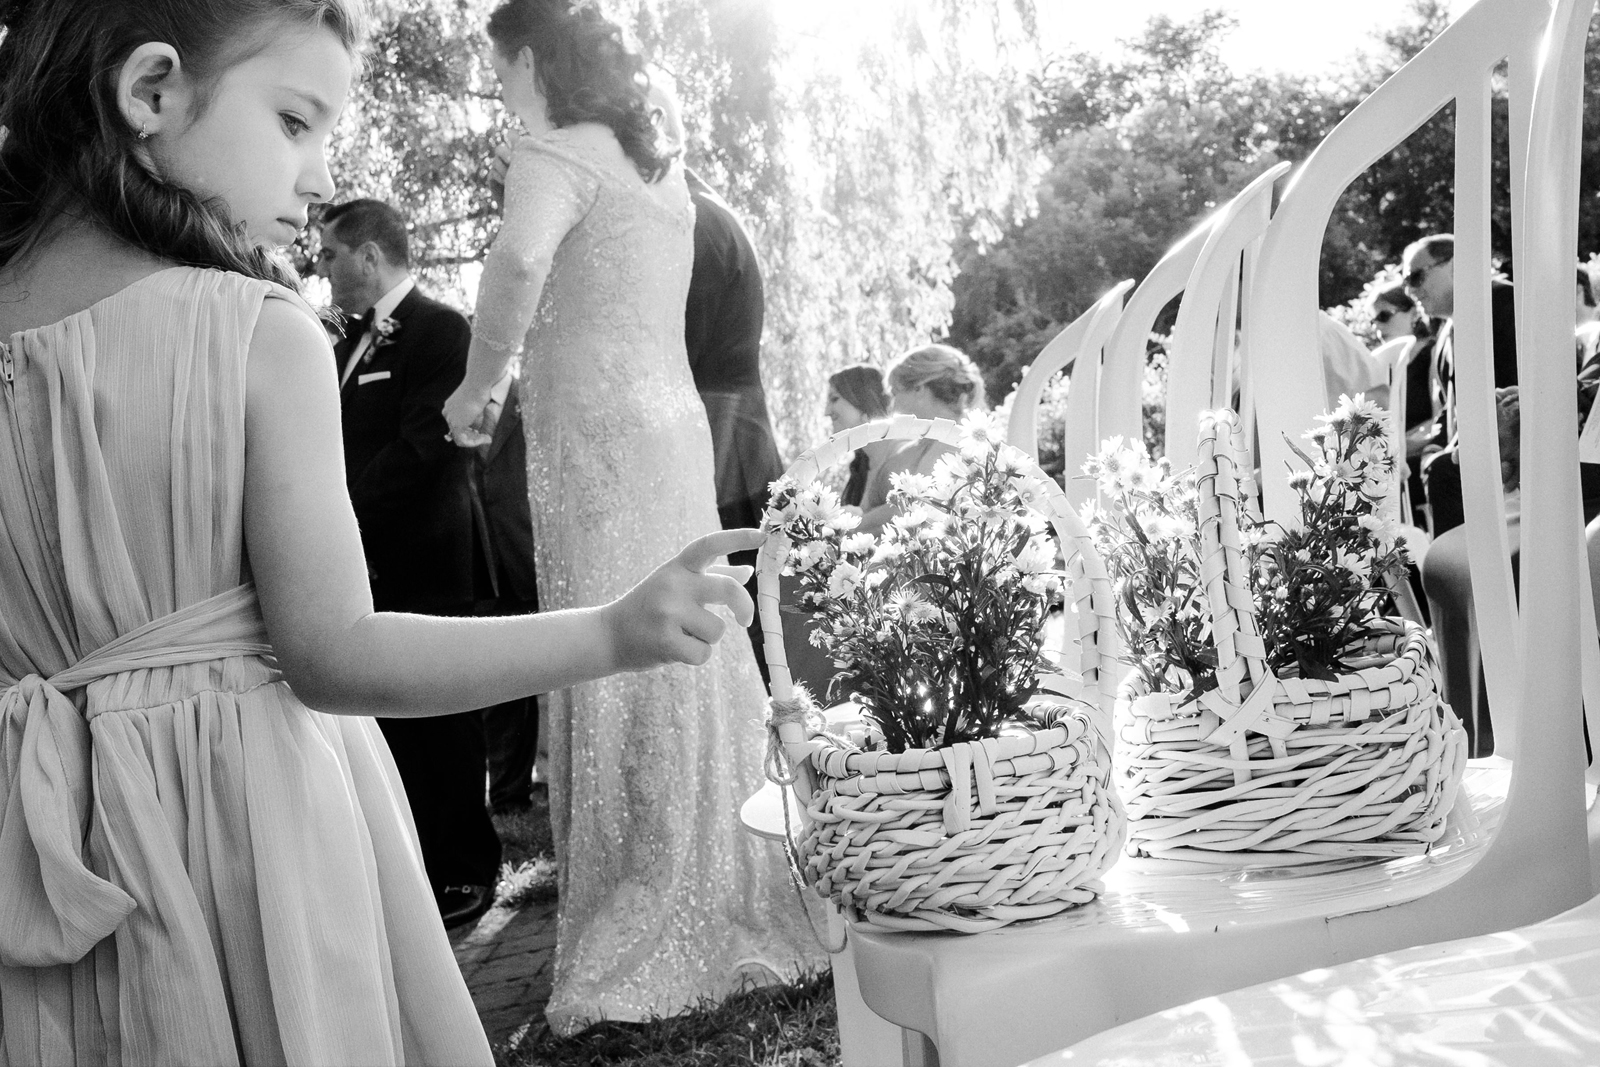 Flower girl curiously touching a flower basket